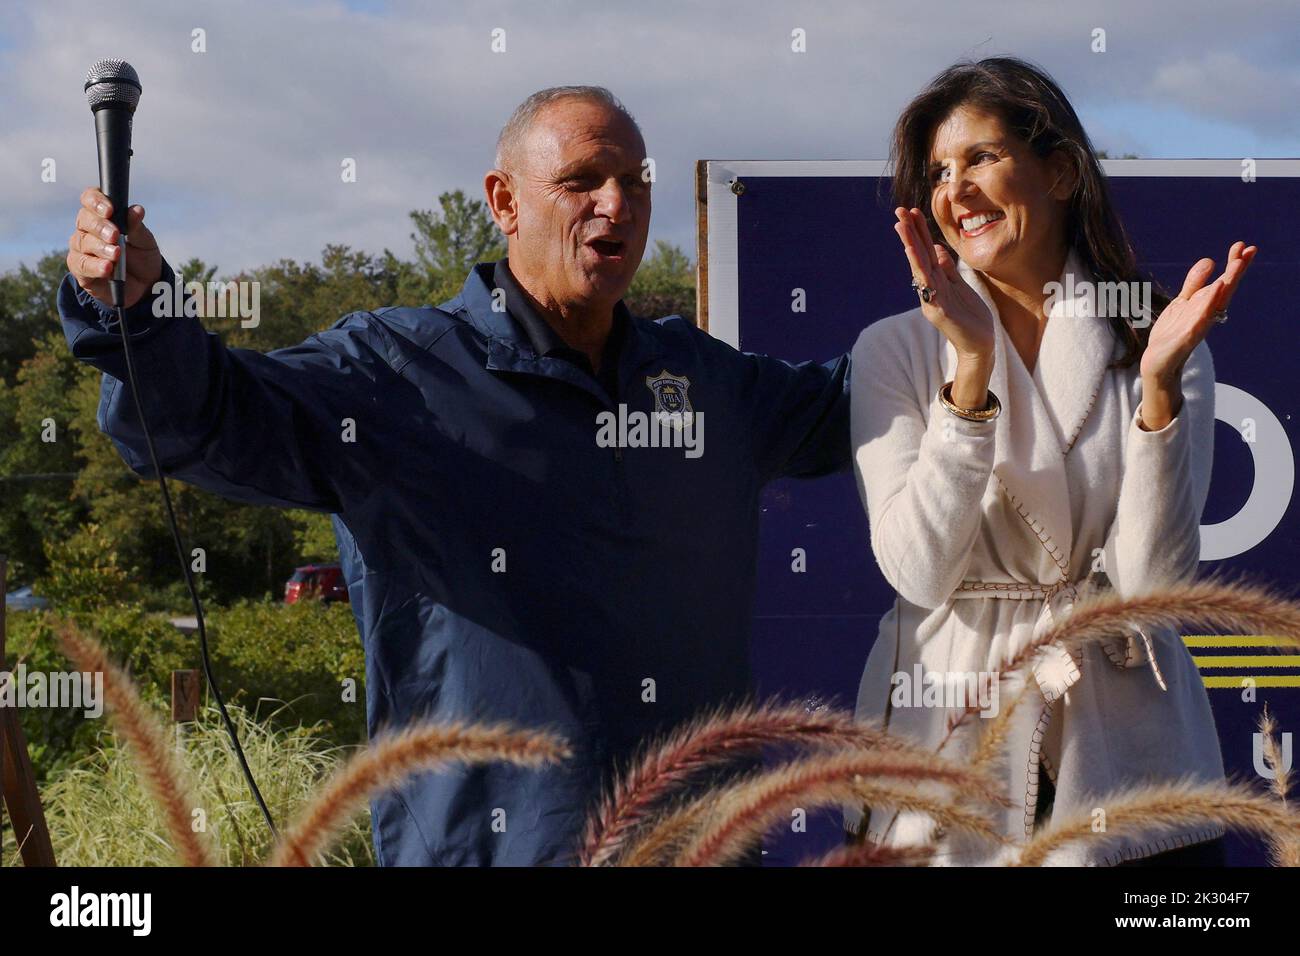 Republican candidate for the U.S. Senate Don Bolduc is joined at a campaign stop by former U.S. Ambassador to the United Nations Nikki Haley, who recently endorsed Bolduc, in Hollis, New Hampshire, U.S., September 23, 2022.  REUTERS/Brian Snyder Stock Photo